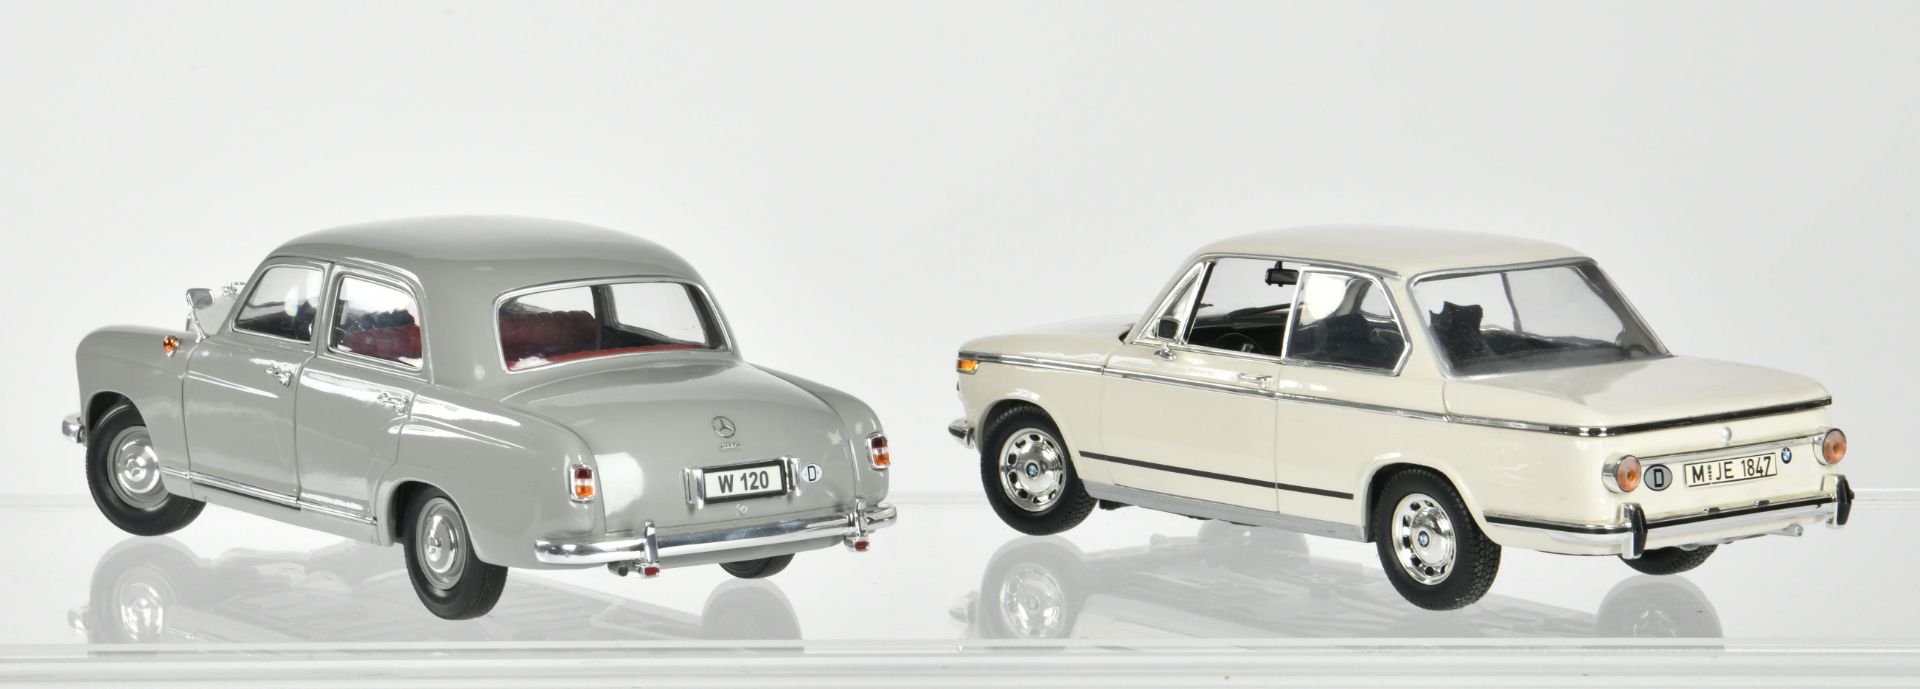 2 models 1:18, windshield wipers damaged, otherwise very good - Image 2 of 3